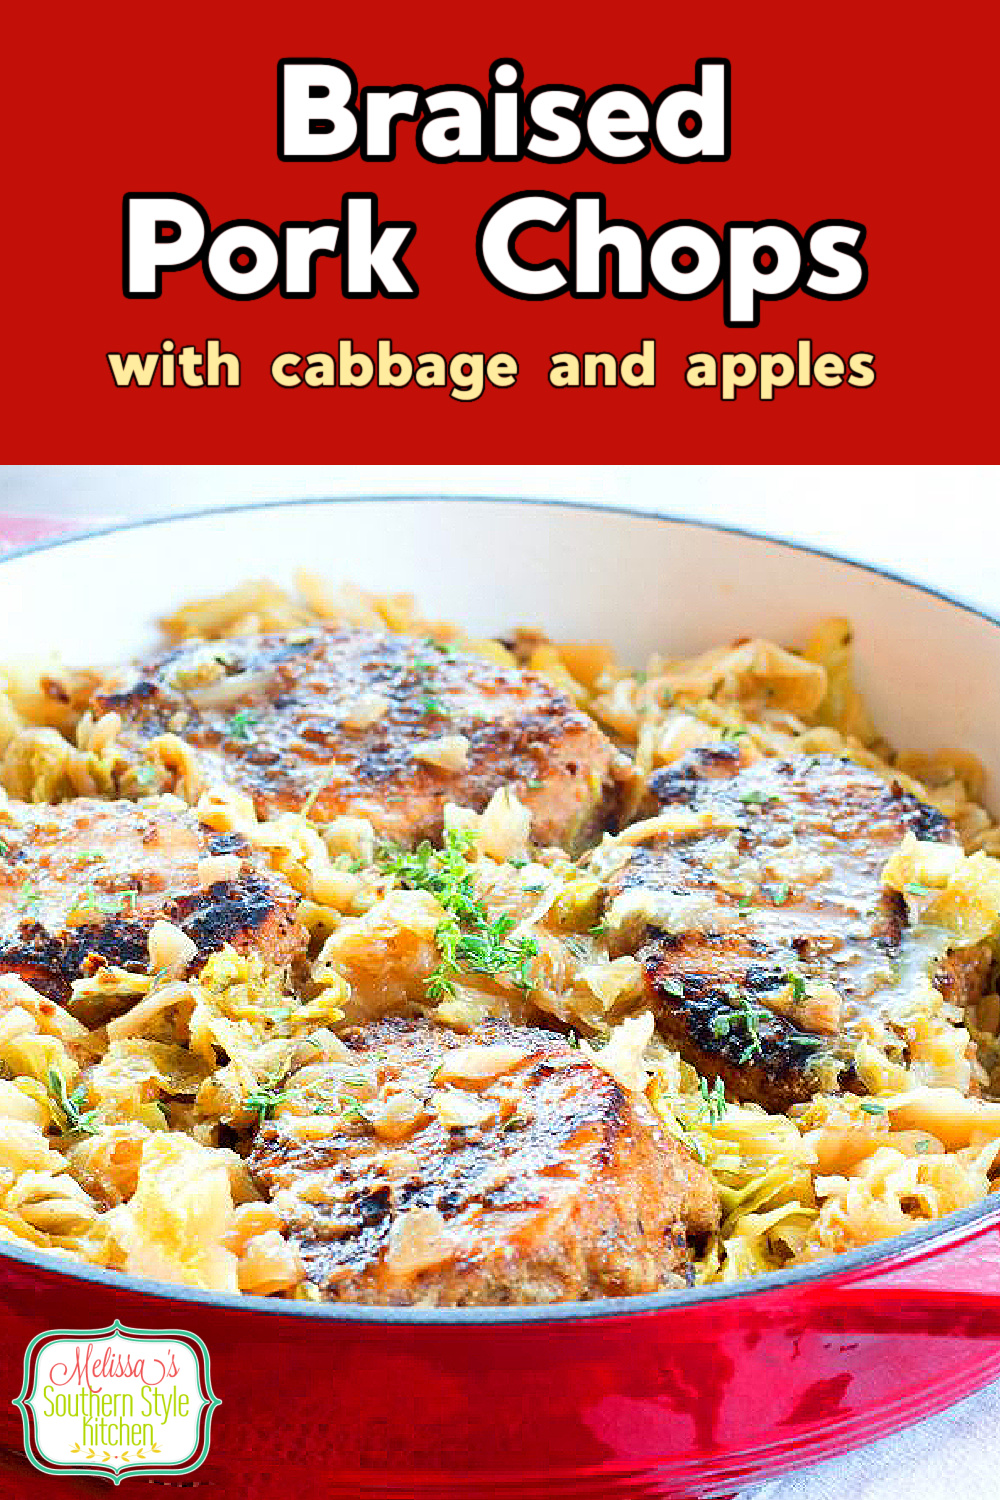 These thick cut pork chops are rubbed with Cajun seasonings then simmered with cabbage and apples until fall apart tender #porkchops #porkrecipes #cabbage #apples #braisedcabbage #braisedporkchops #fall #fallfood #southernrecipes #southernfood #harvestrecipes